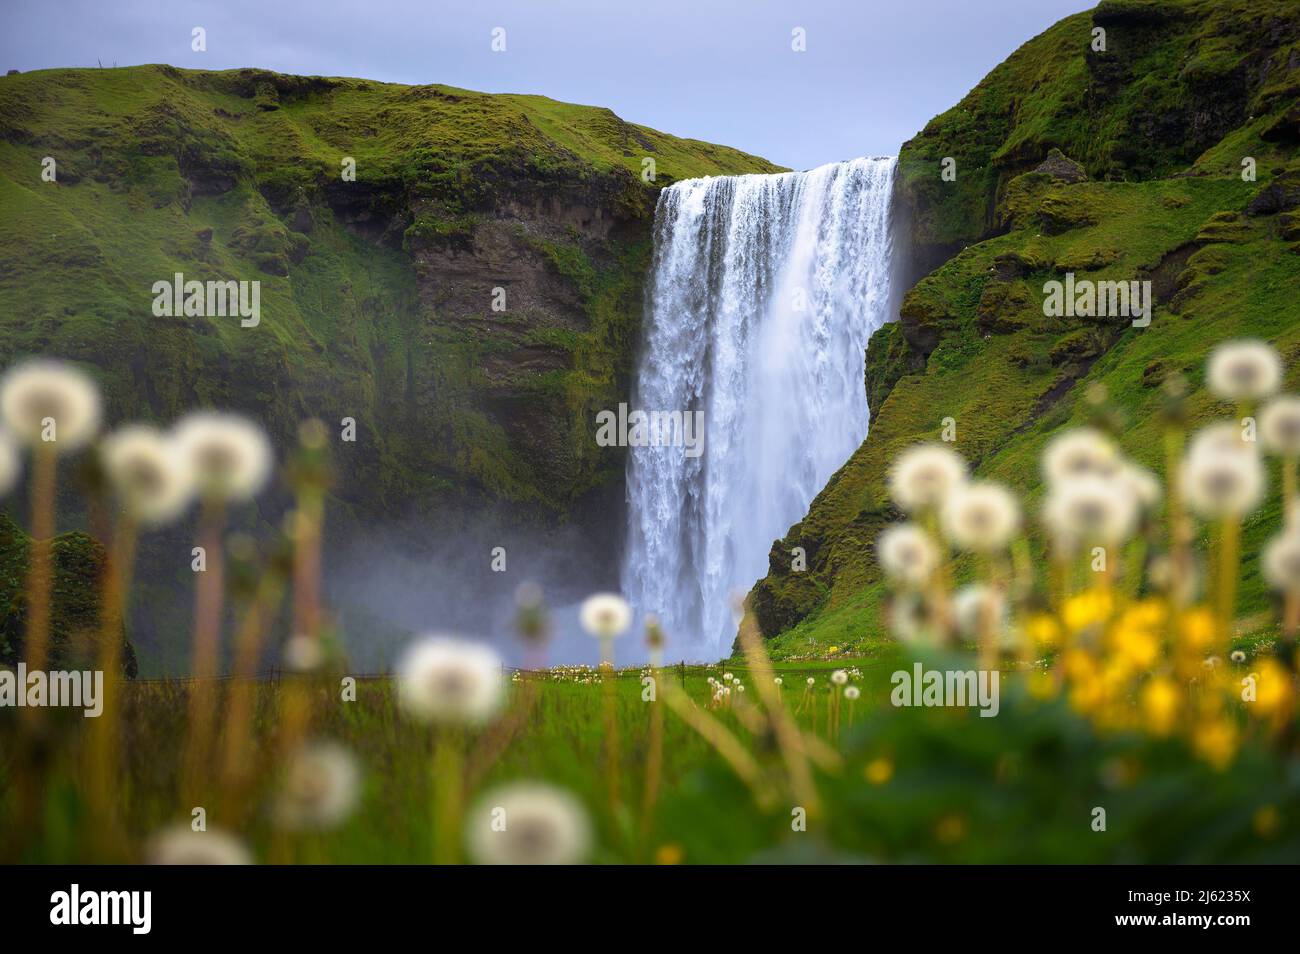 Skogafoss waterfall in Iceland with flowers in the foreground Stock Photo